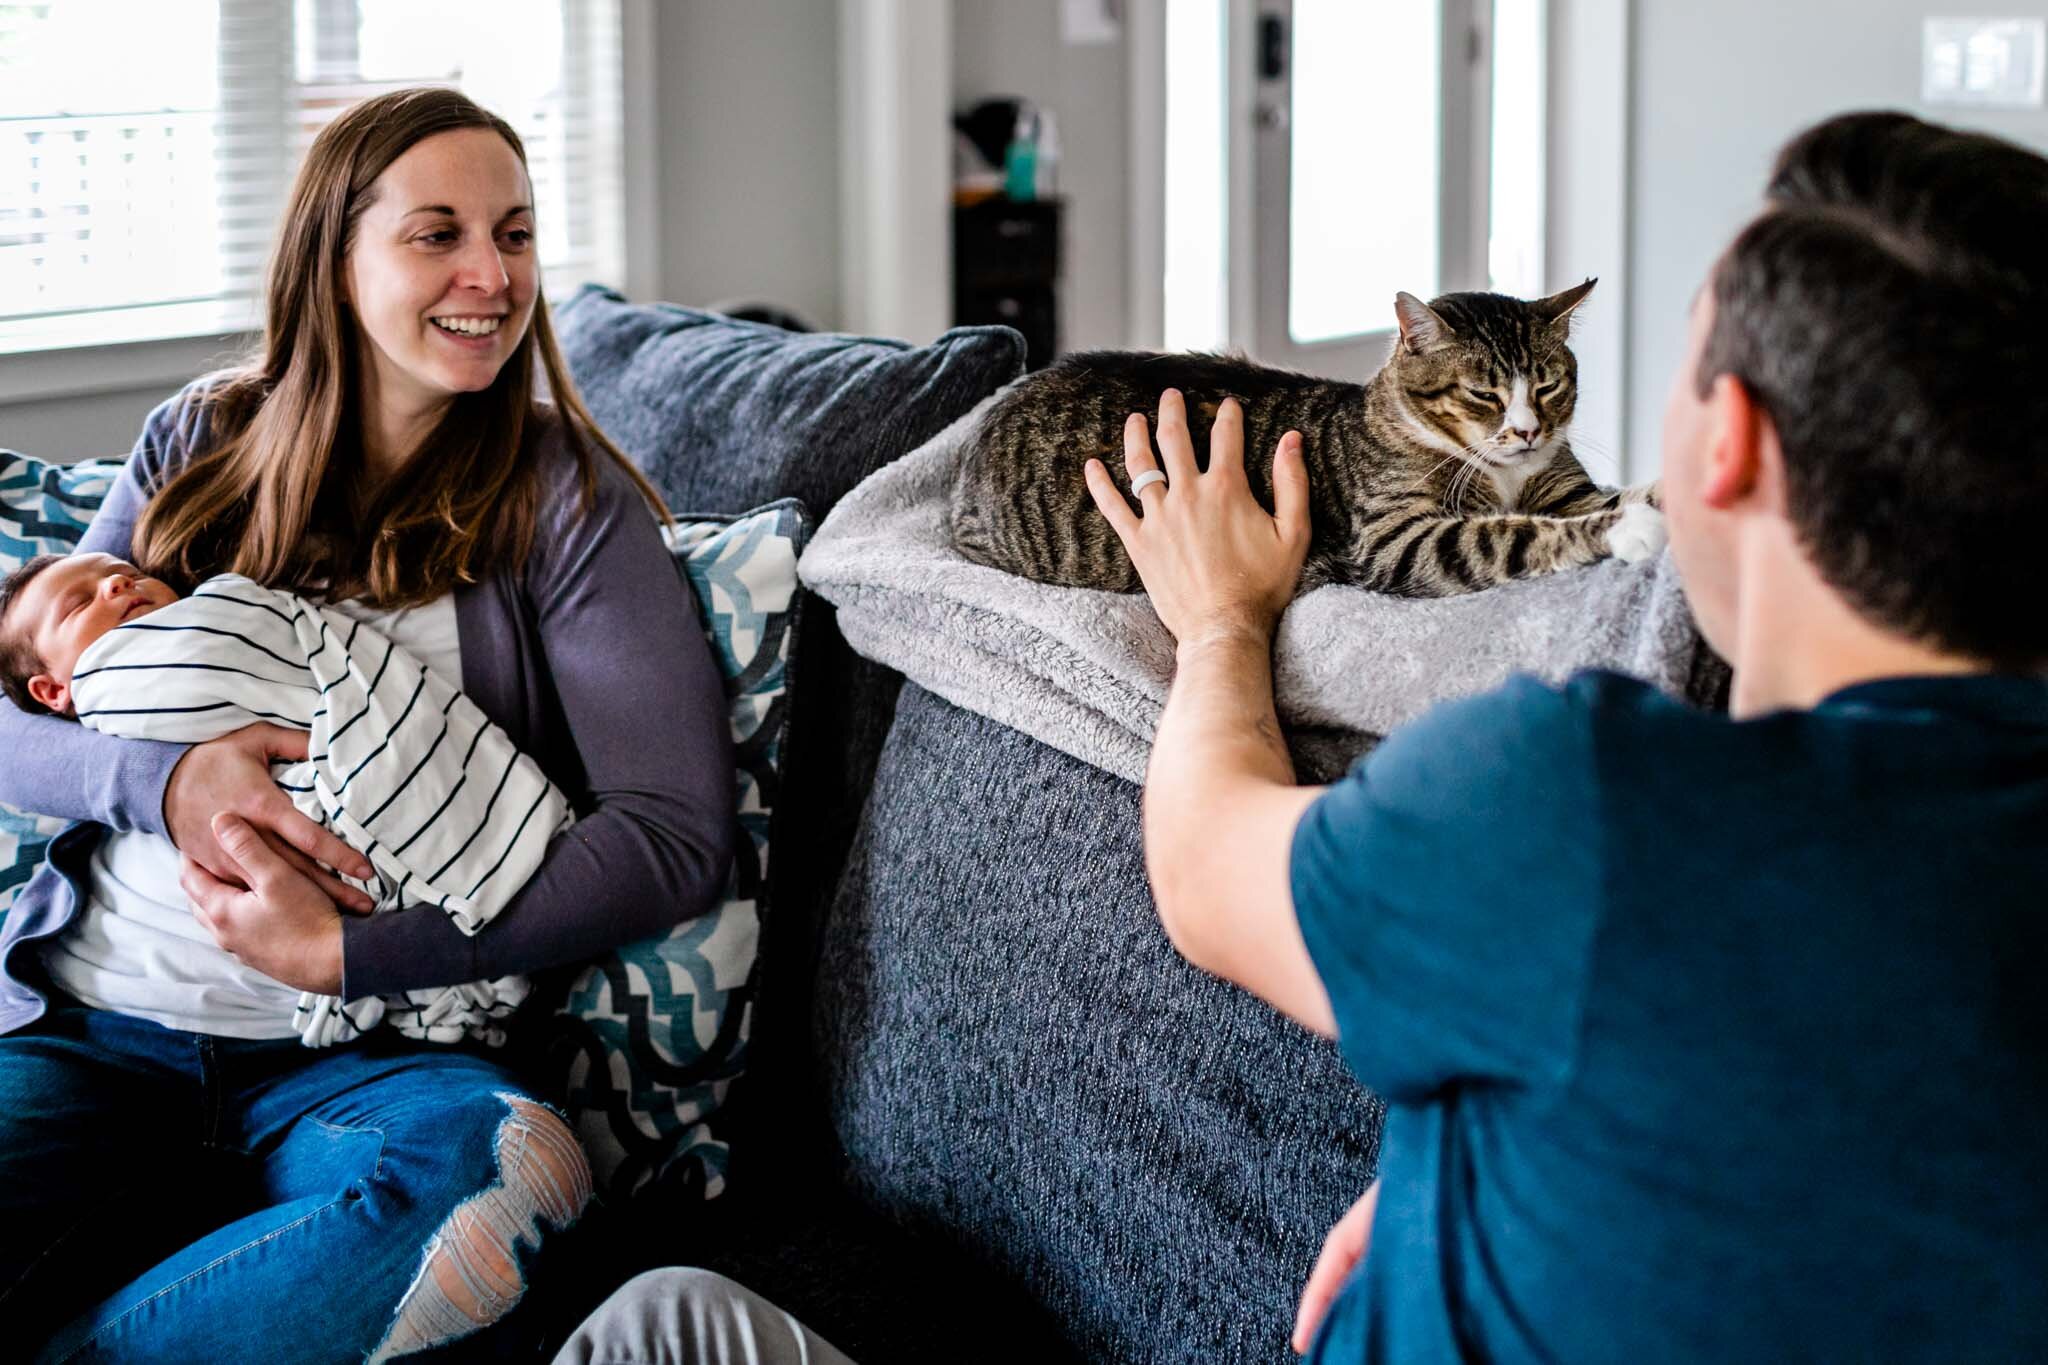 Durham Newborn Photographer | By G. Lin Photography | Family sitting on couch and petting cat